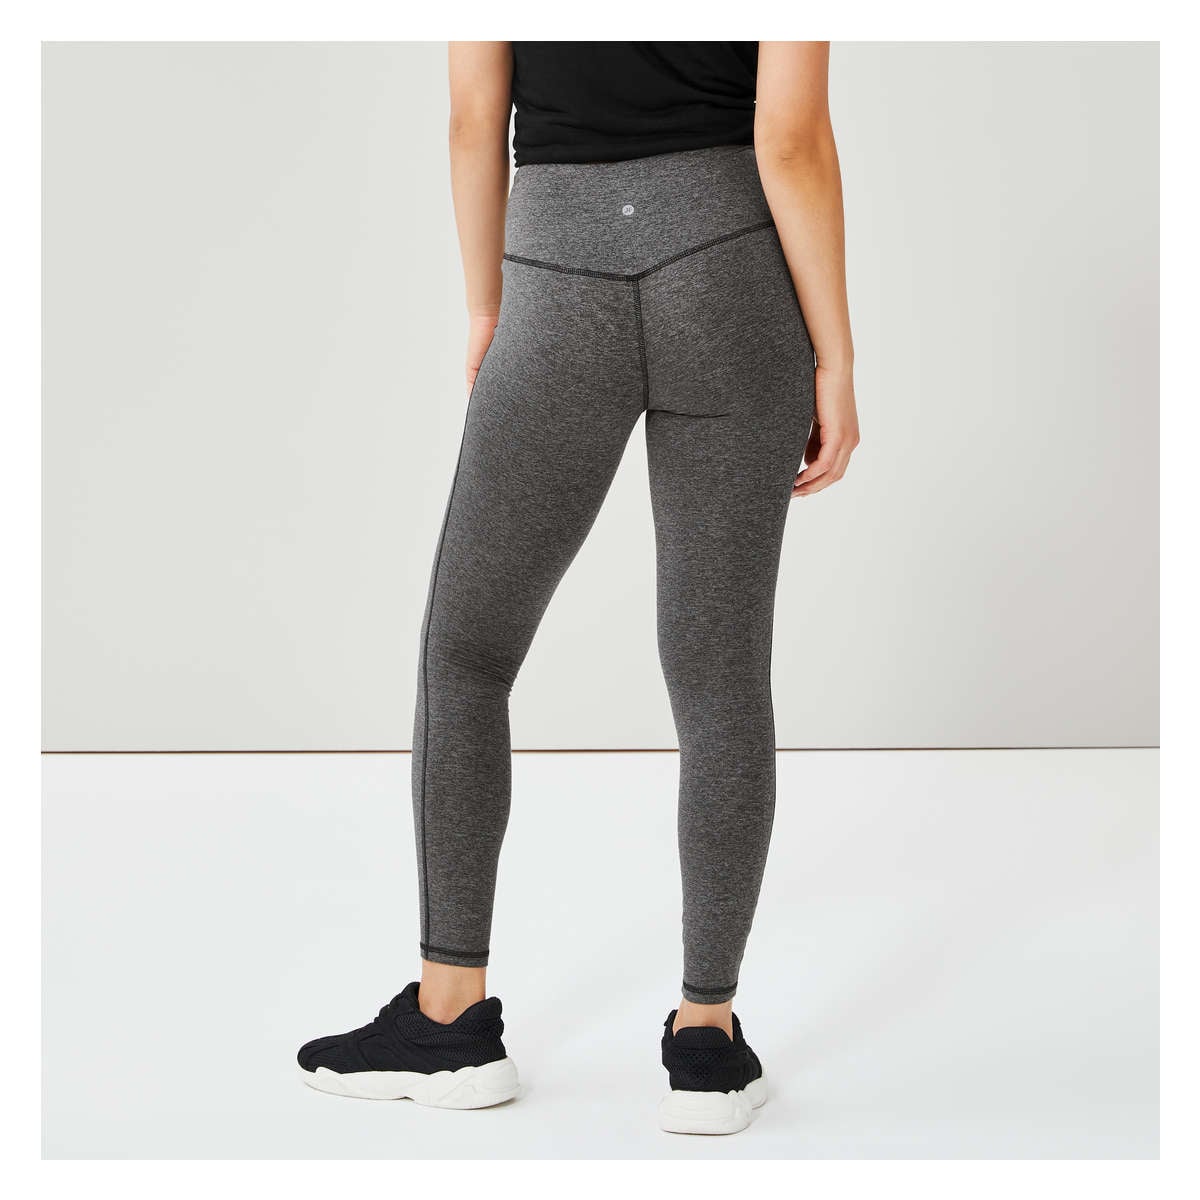 Active Legging in Teal Mix from Joe Fresh